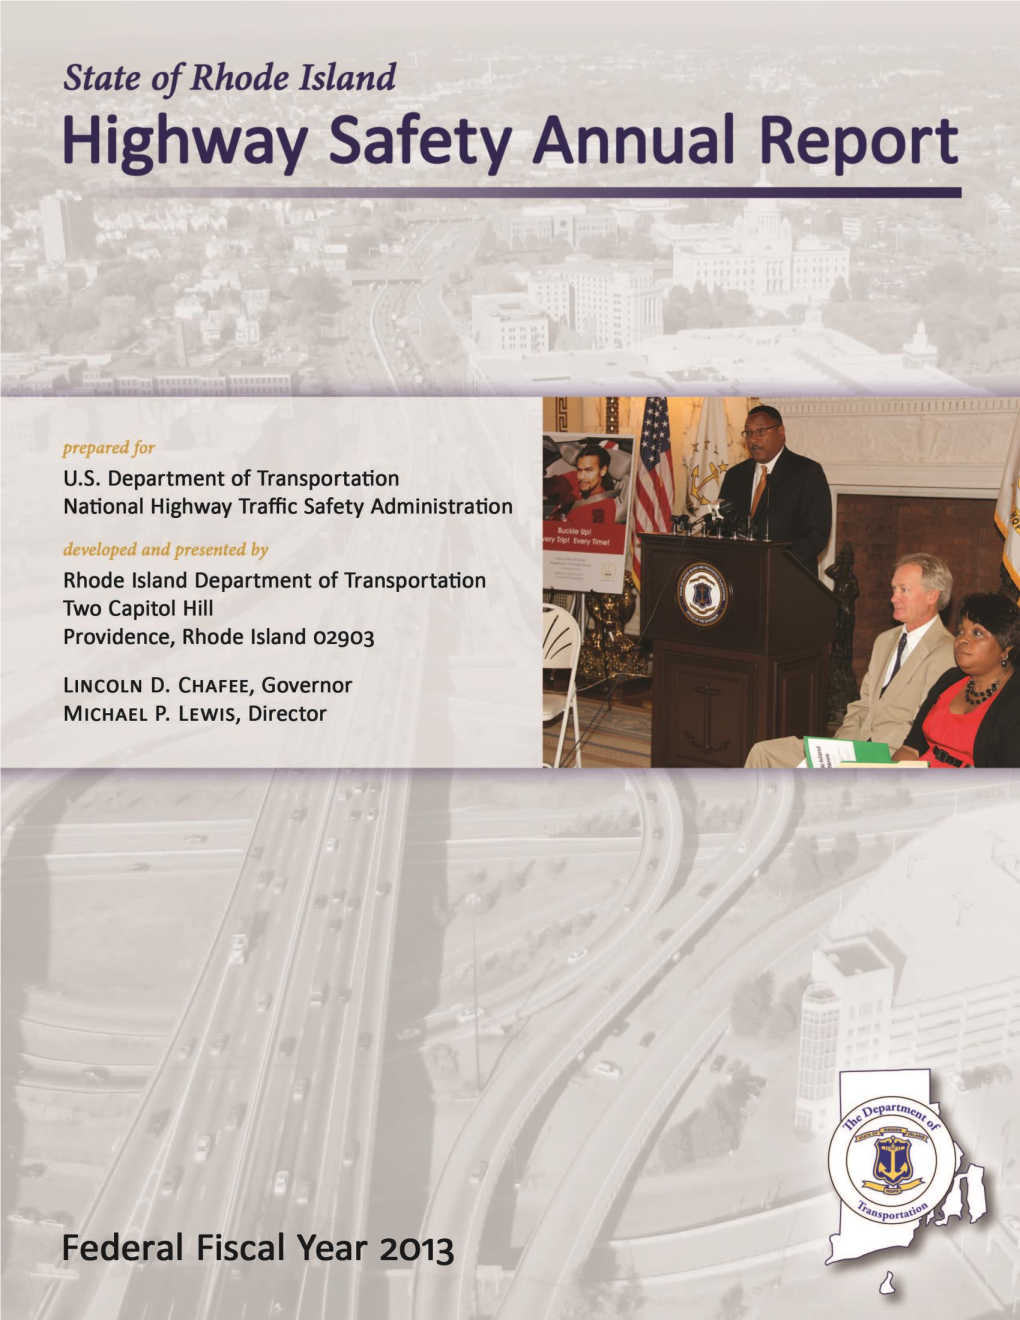 State of Rhode Island Highway Safety Annual Report